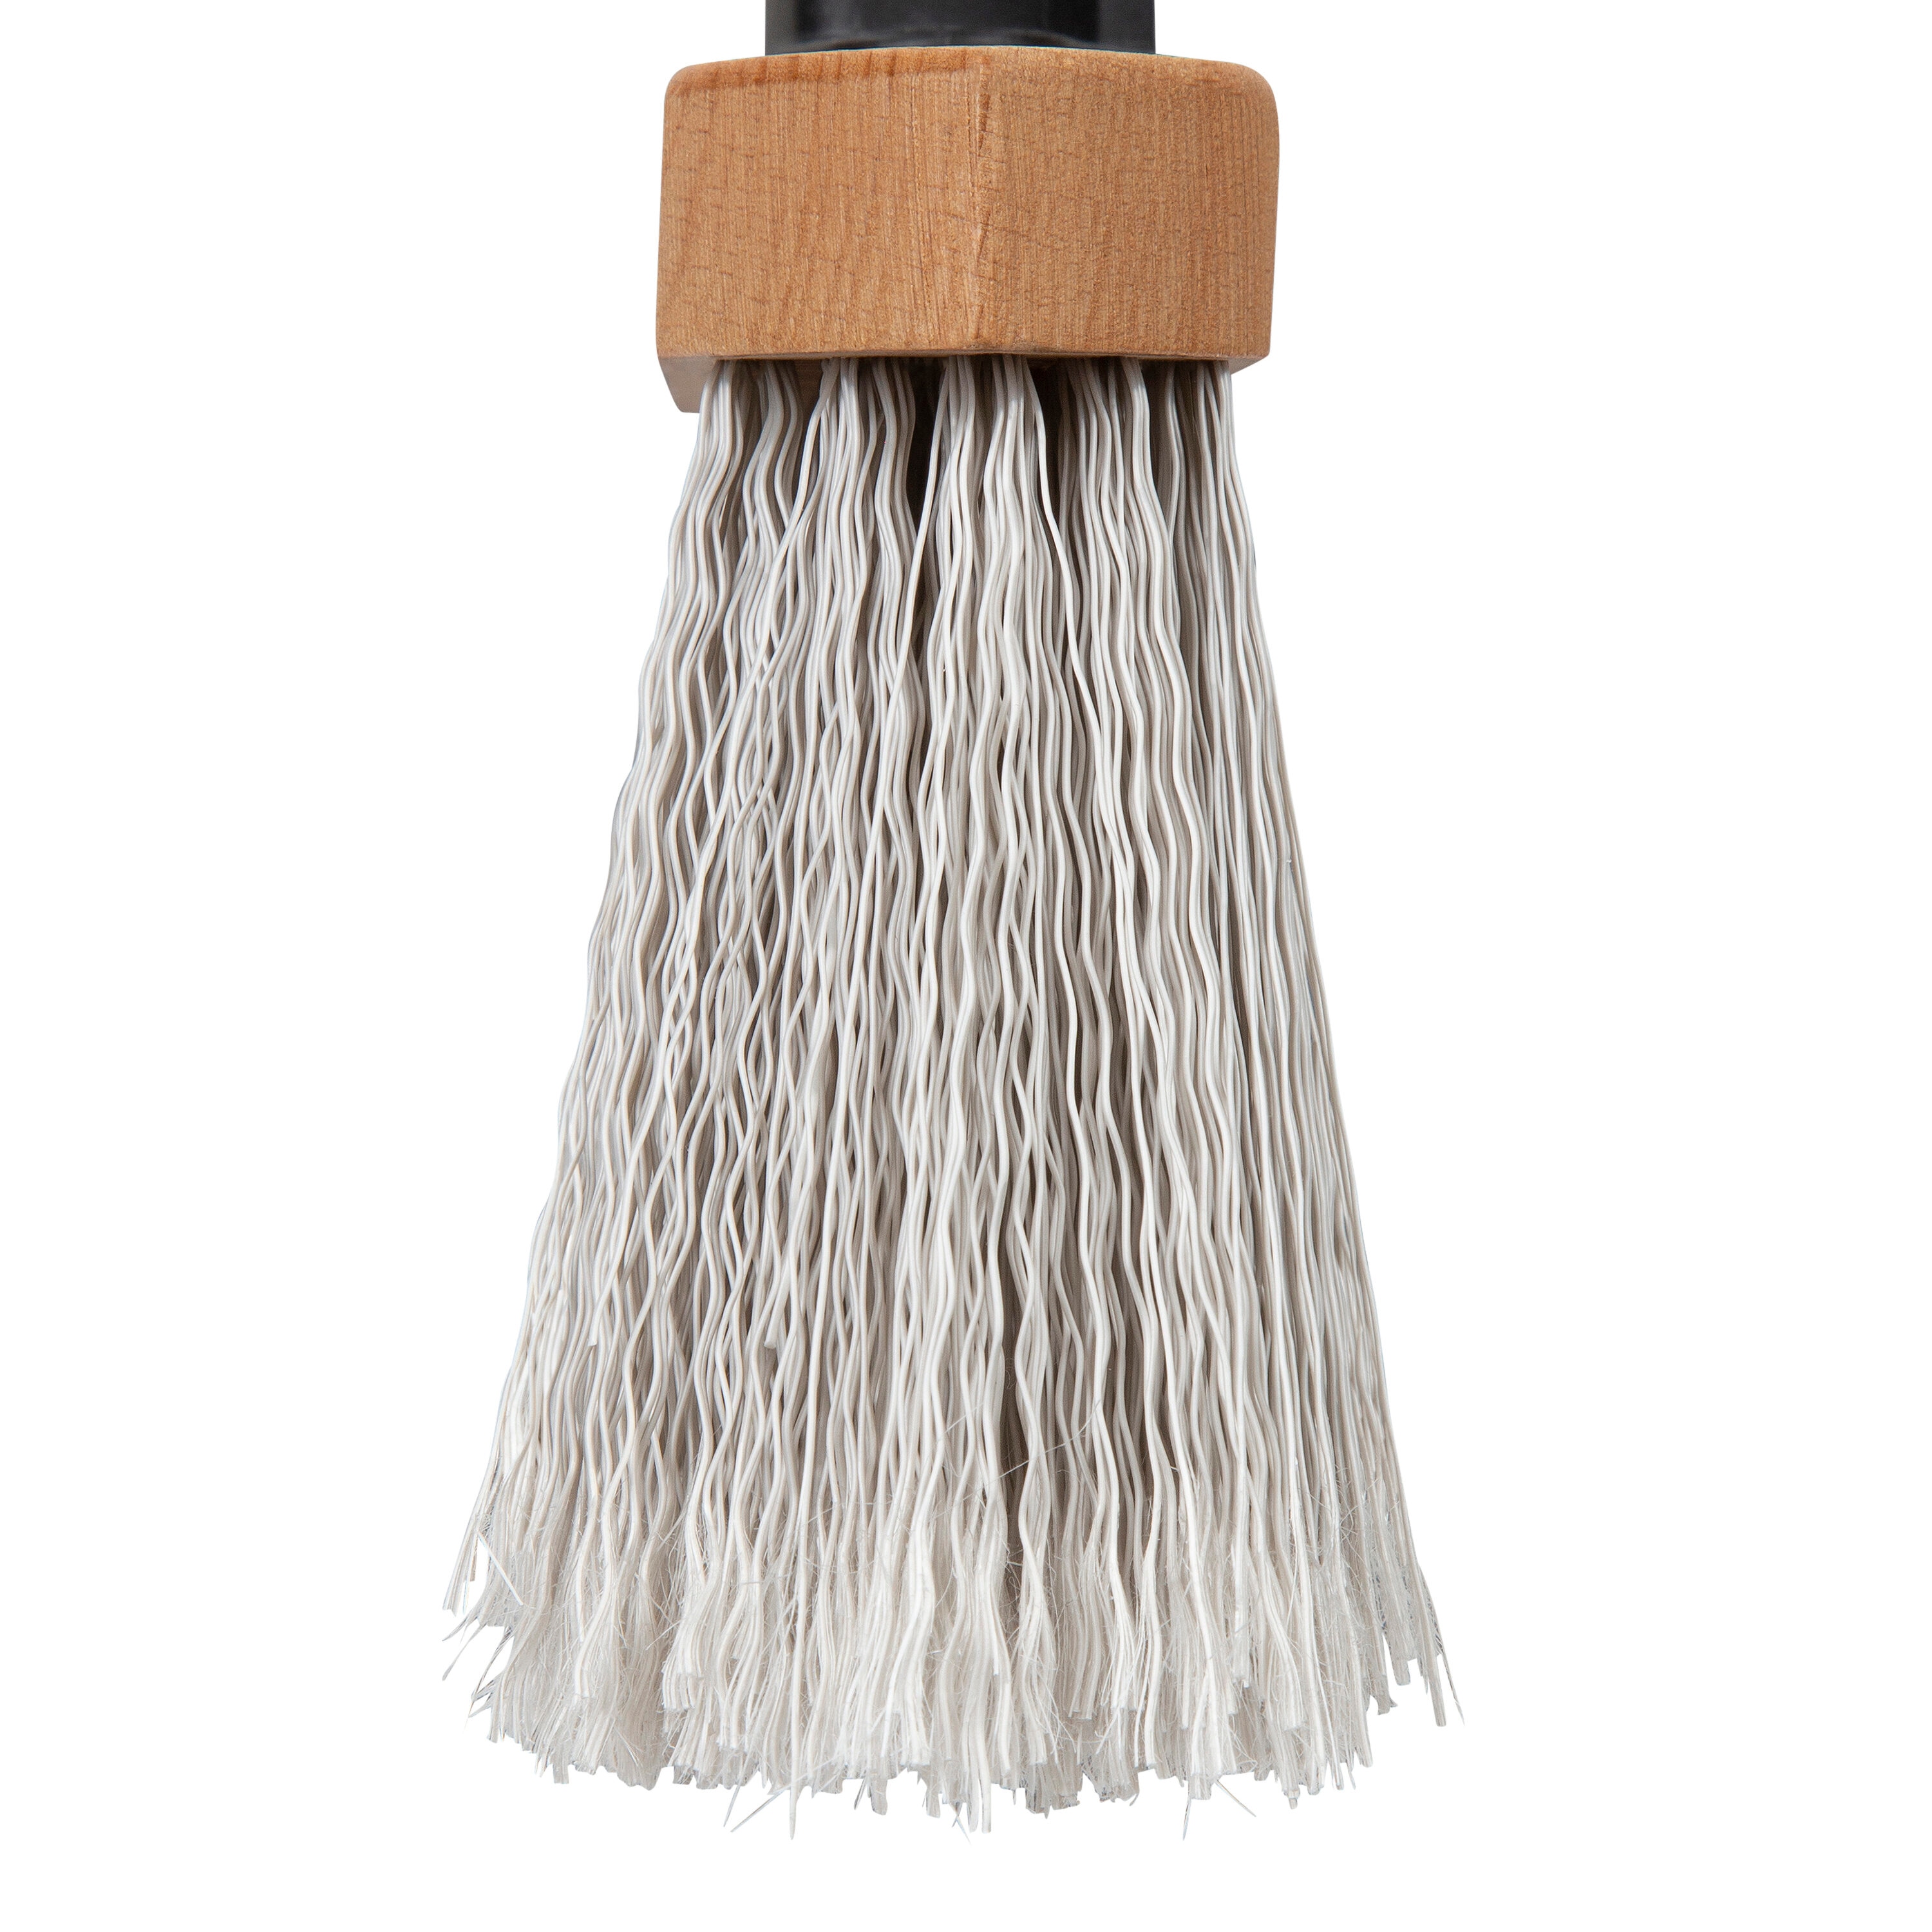 SWOPT Premium Head 11-in Poly Fiber Smooth Surface All-purpose Upright Broom